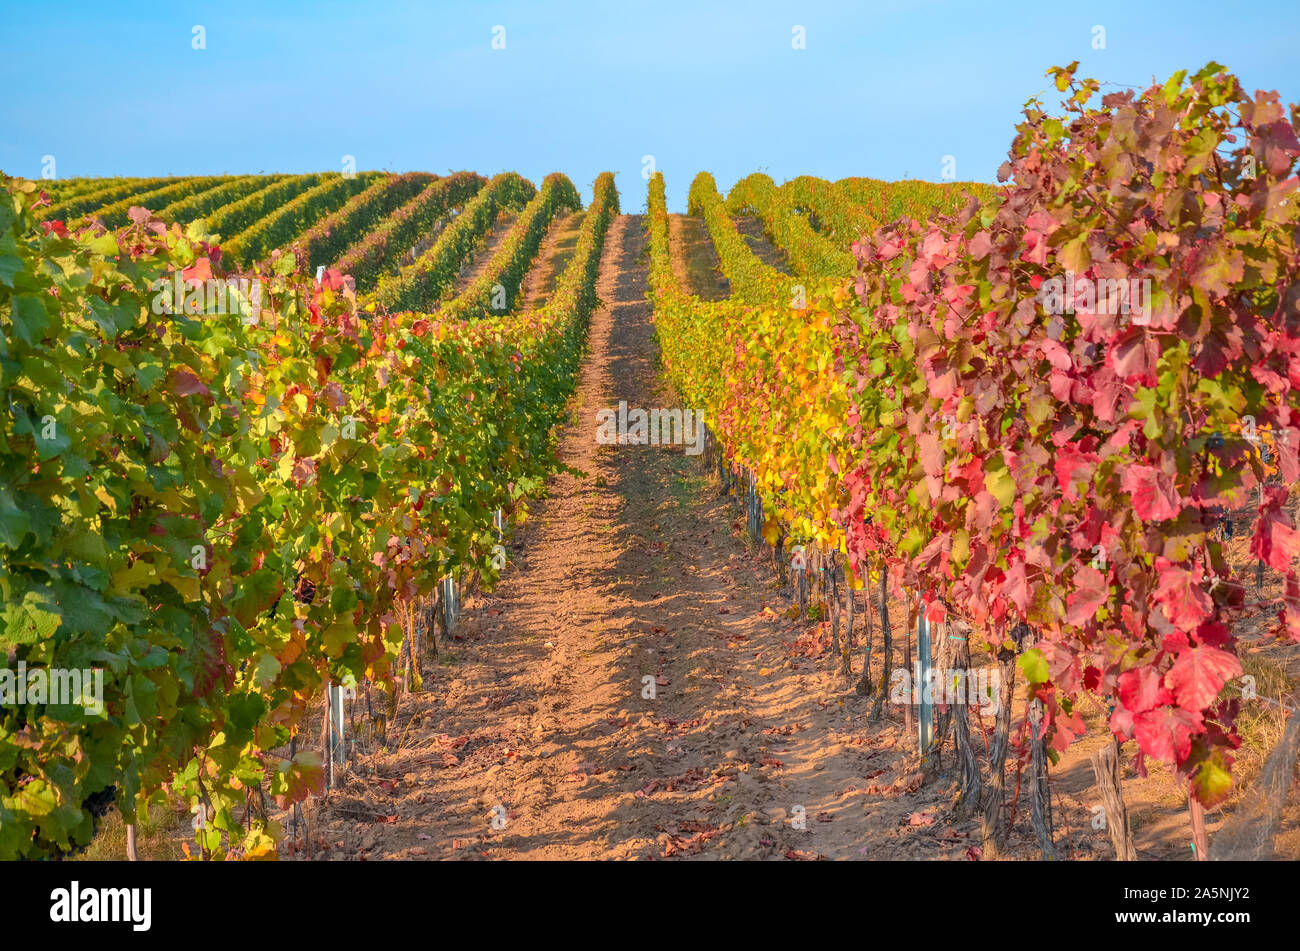 Beautiful autumn vineyard in Moravia, Czech Republic. Rows of vineyards, partly blurred leaves. Colorful, red and golden vine leaves. Fall landscape. Seasons of the year. Stock Photo